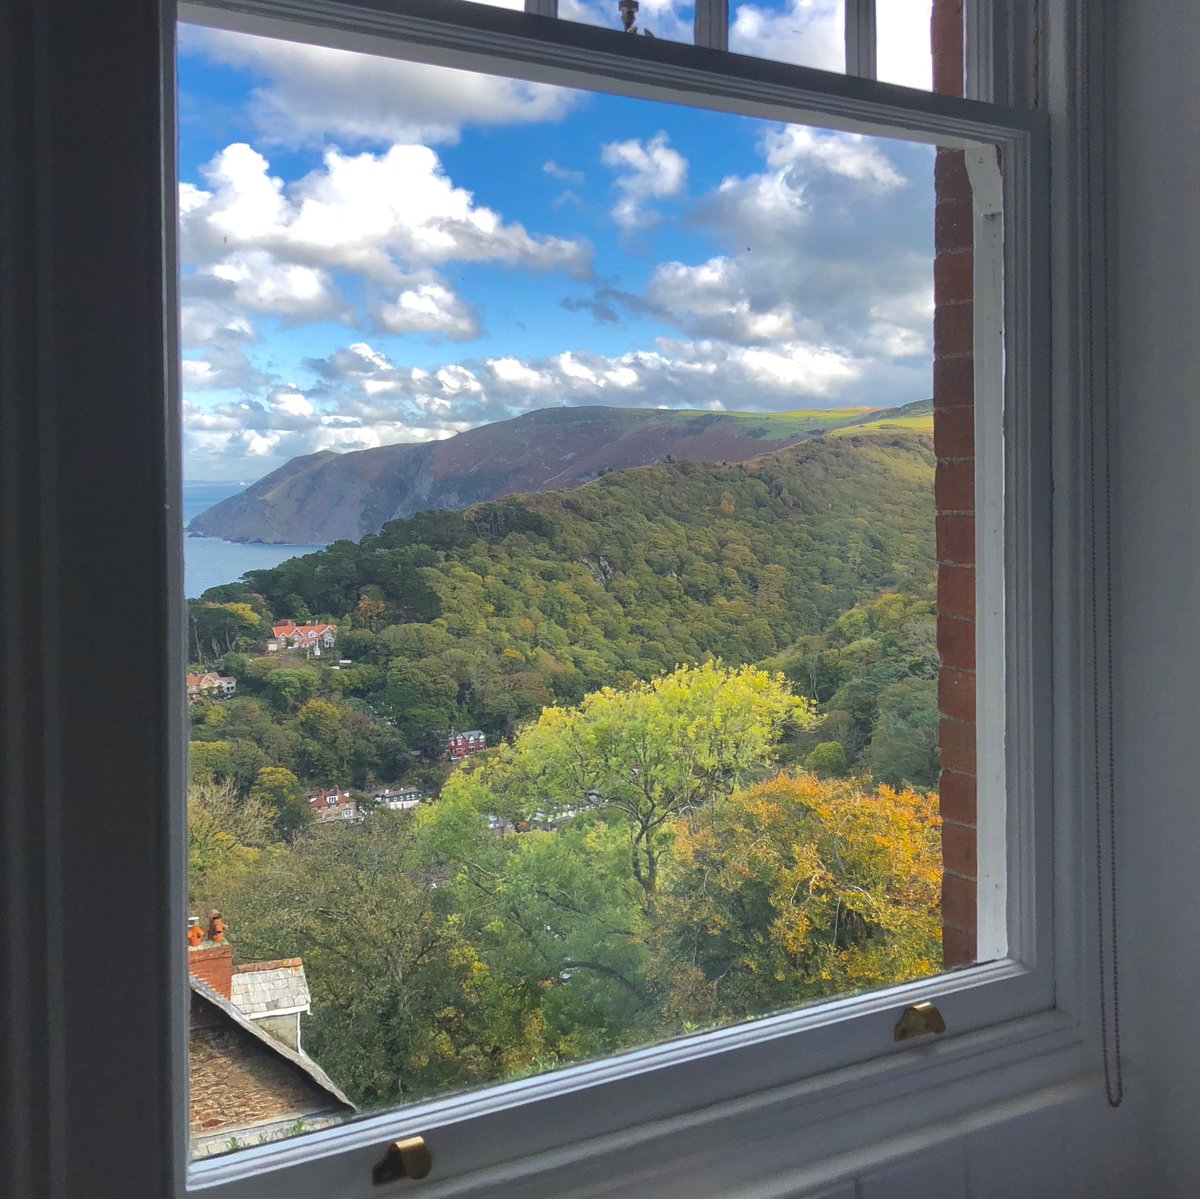 Do you sometimes look out of your window and wish you were somewhere else? Erm, no actually.

#lynton #bedandbreakfast #exmoor #northdevon #lovedevon #lookthroughthewindow #getoutside #beautifulbritain #walking #explore #nature